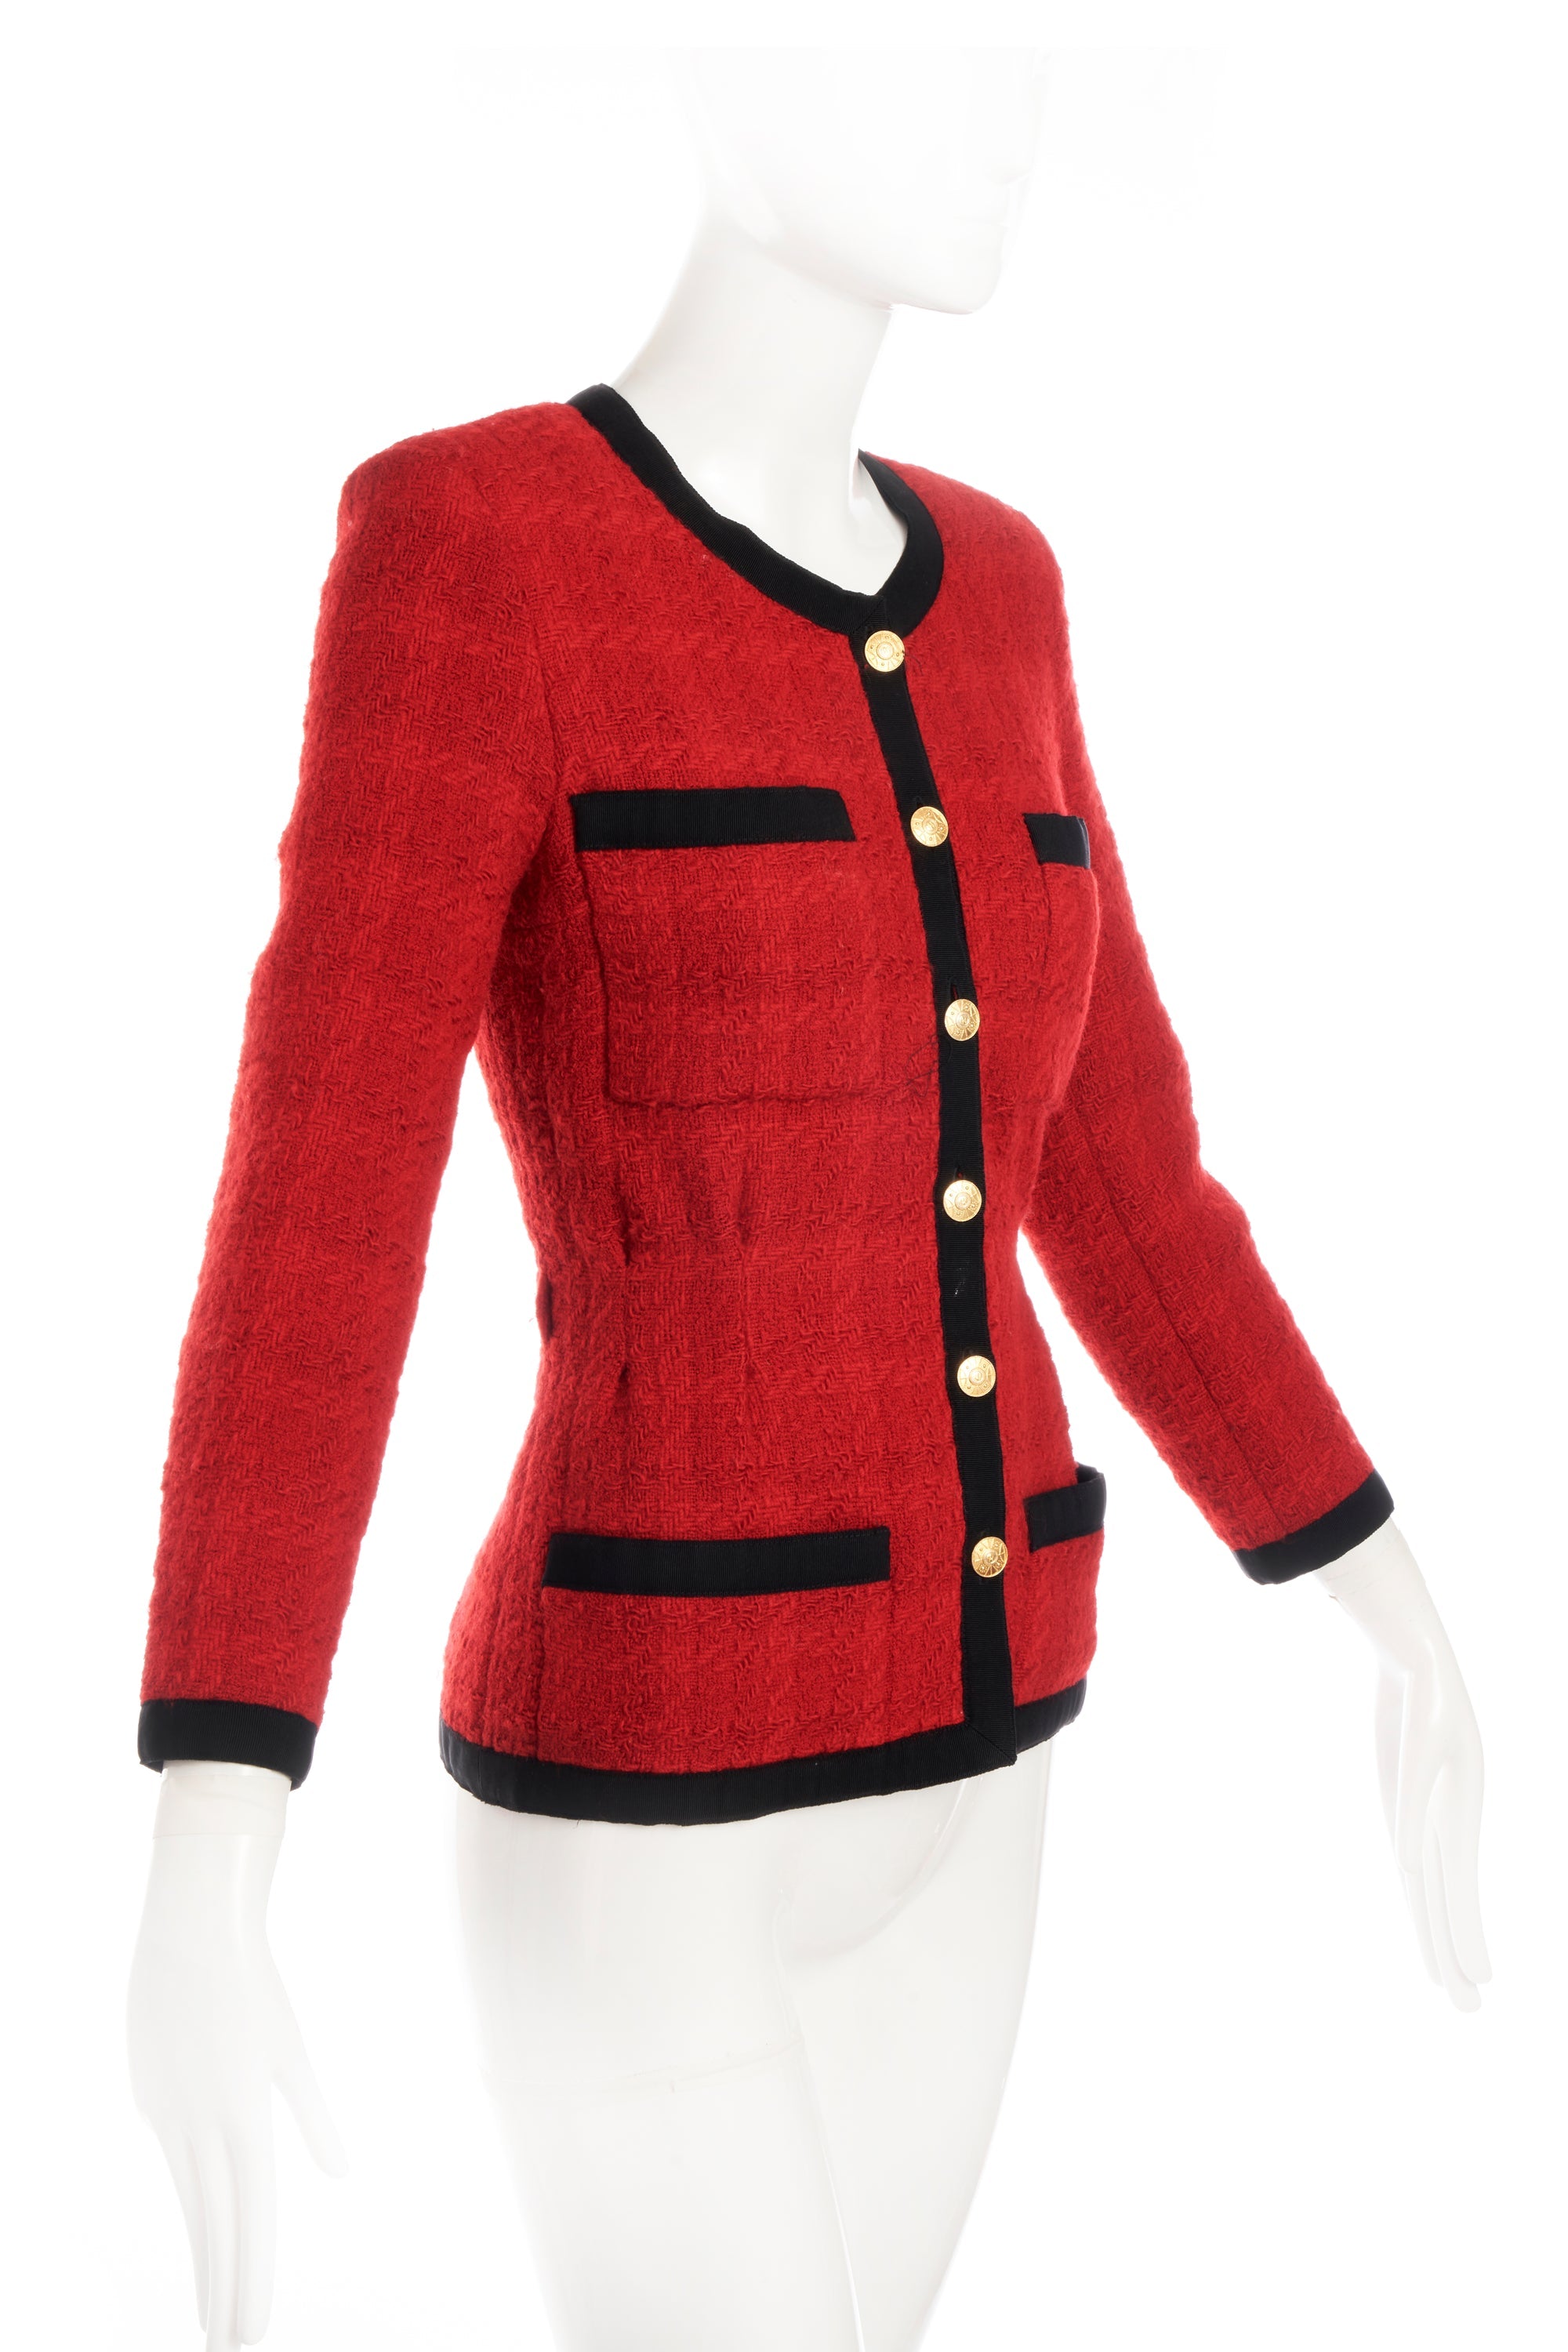 Chanel Red Boucle Jacket Black Faile Trim 24k Gold plated buttons